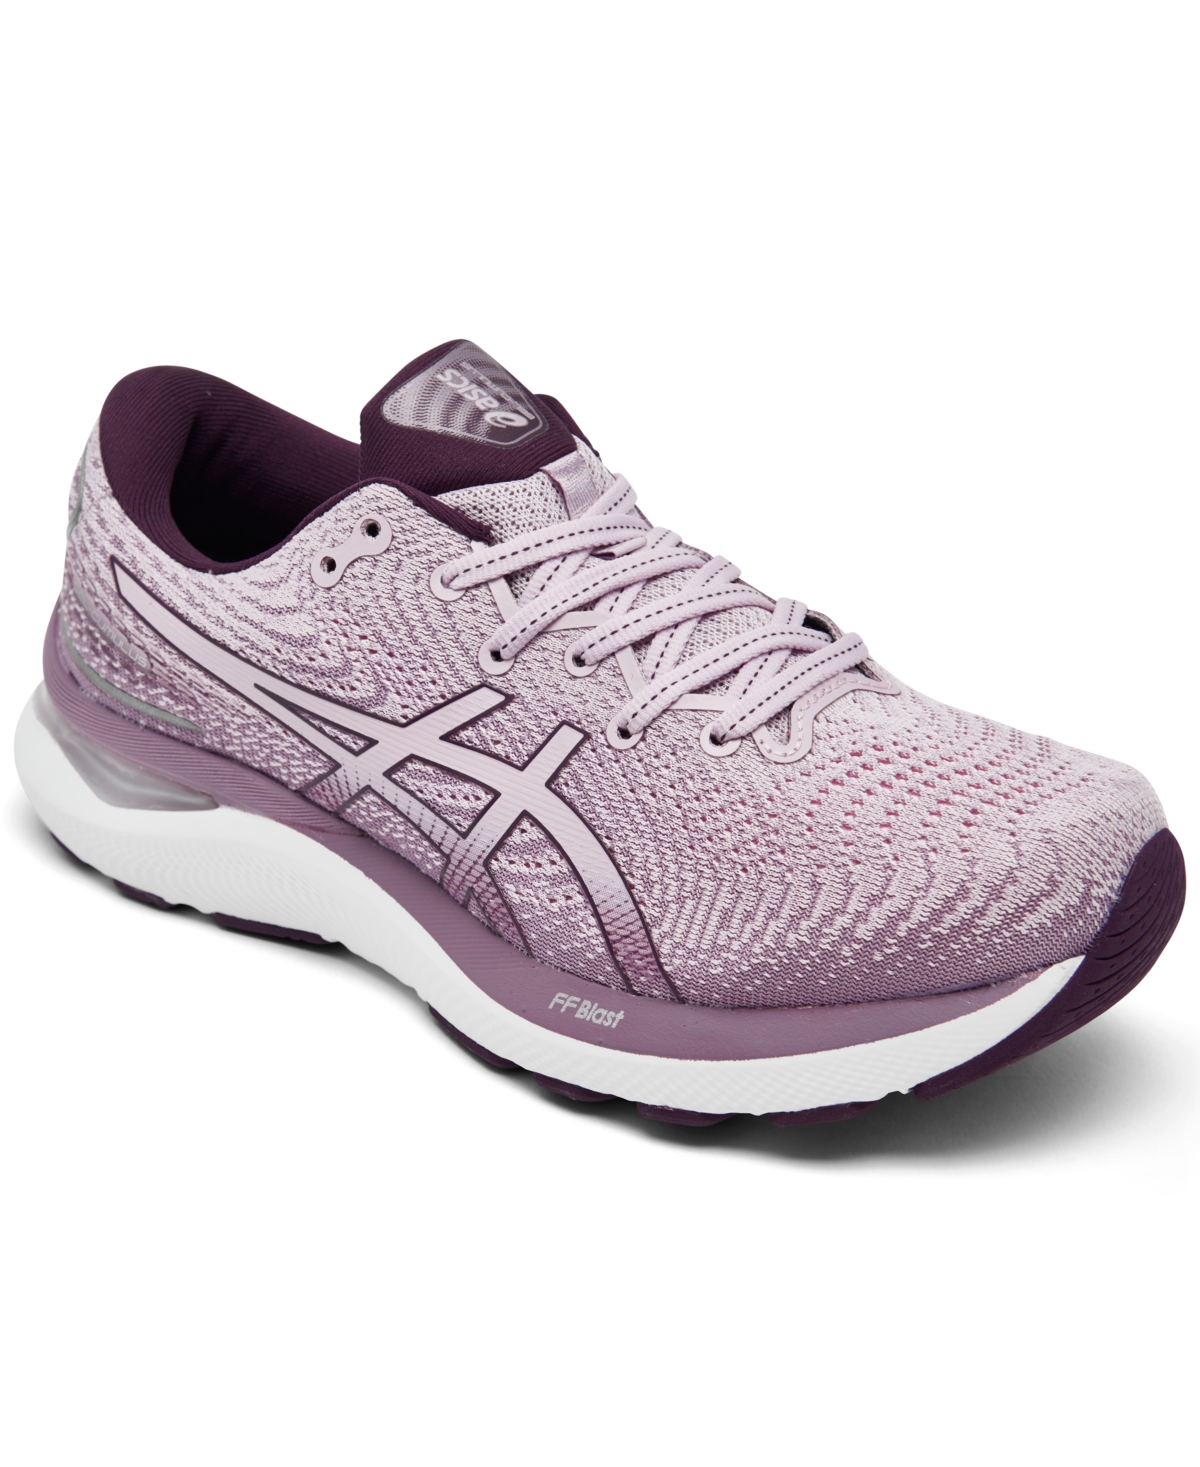 ASICS WOMEN'S GEL-CUMULUS 24 RUNNING SNEAKERS FROM FINISH LINE